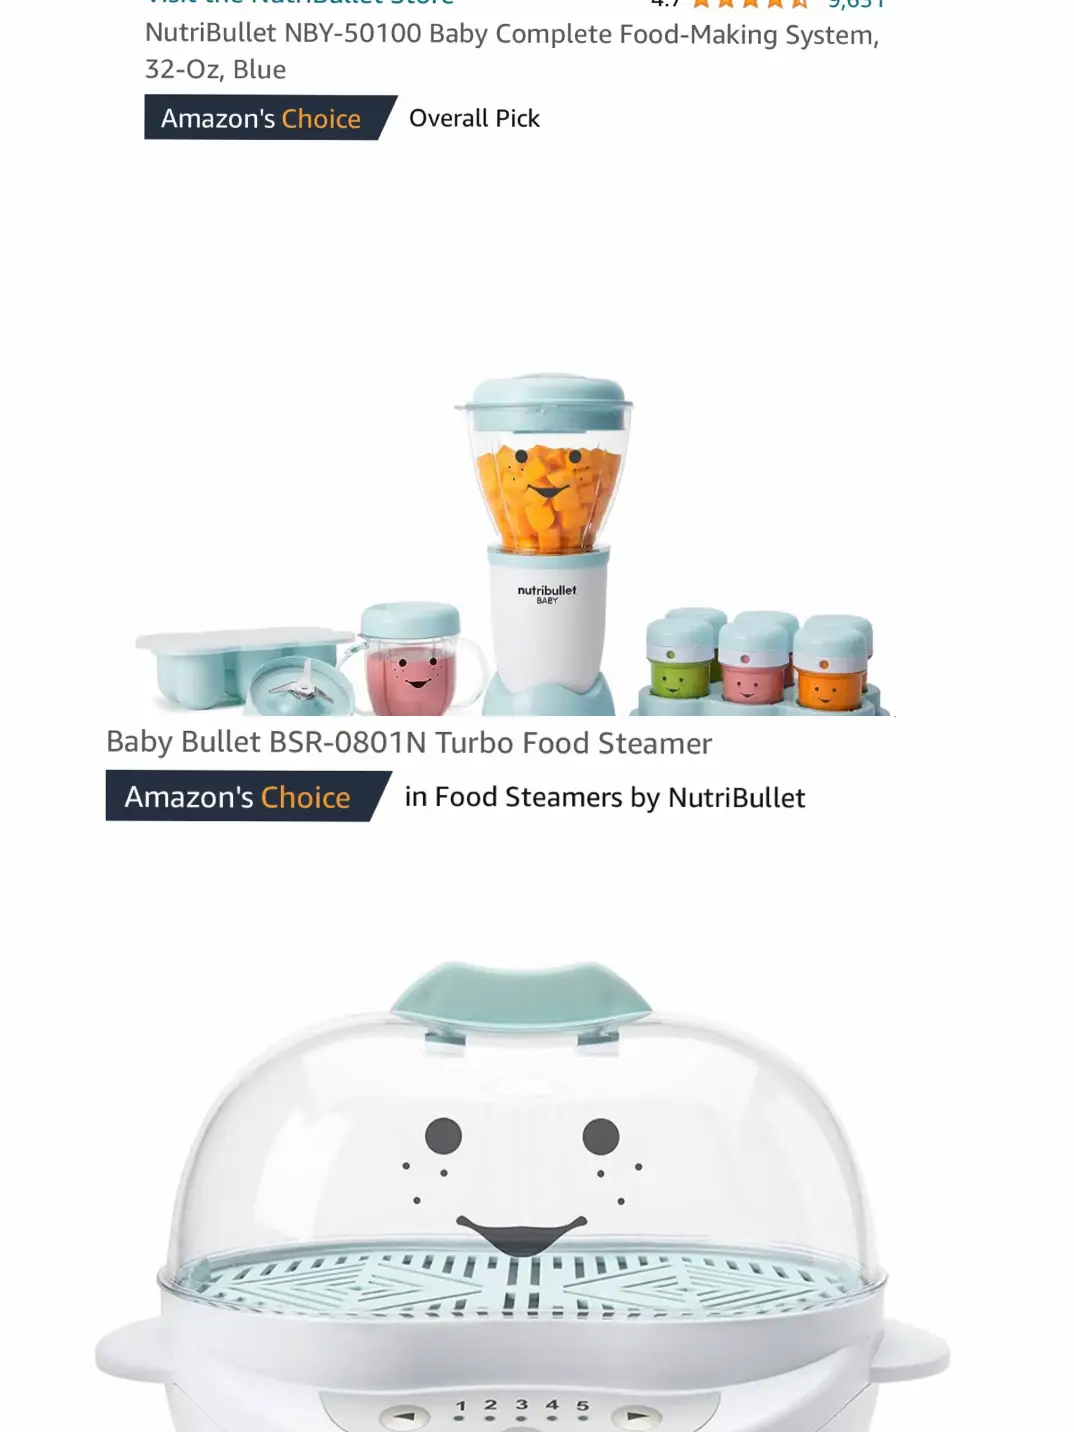 NutriBullet Baby NBY-50100 Food-Making System, 32-Oz, Blue Missing pieces  Read